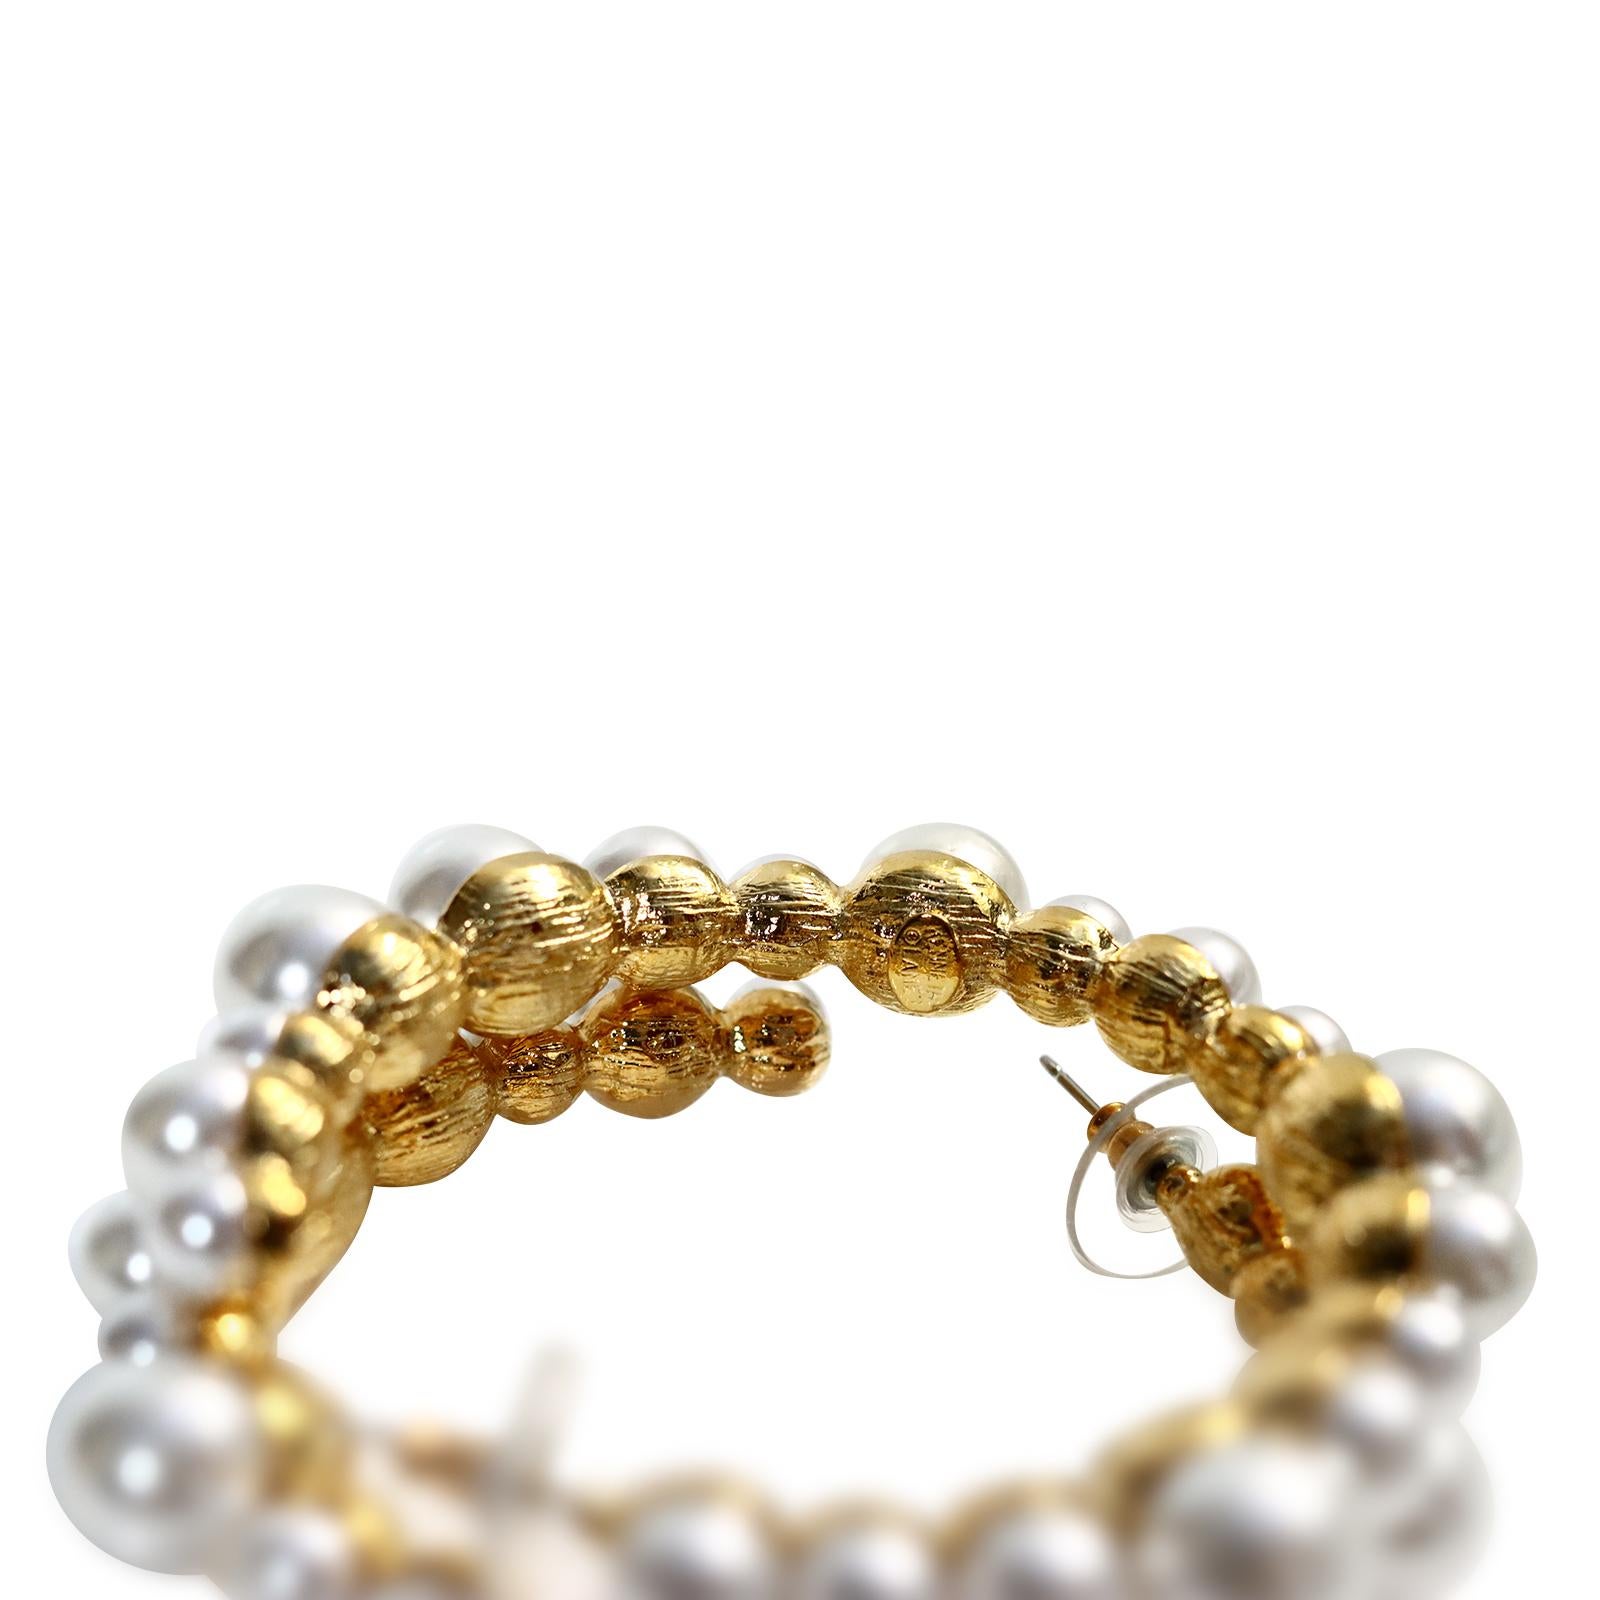 Women's or Men's Collectible KJL Gold Hoops with Faux Pearls Circa 2000s For Sale